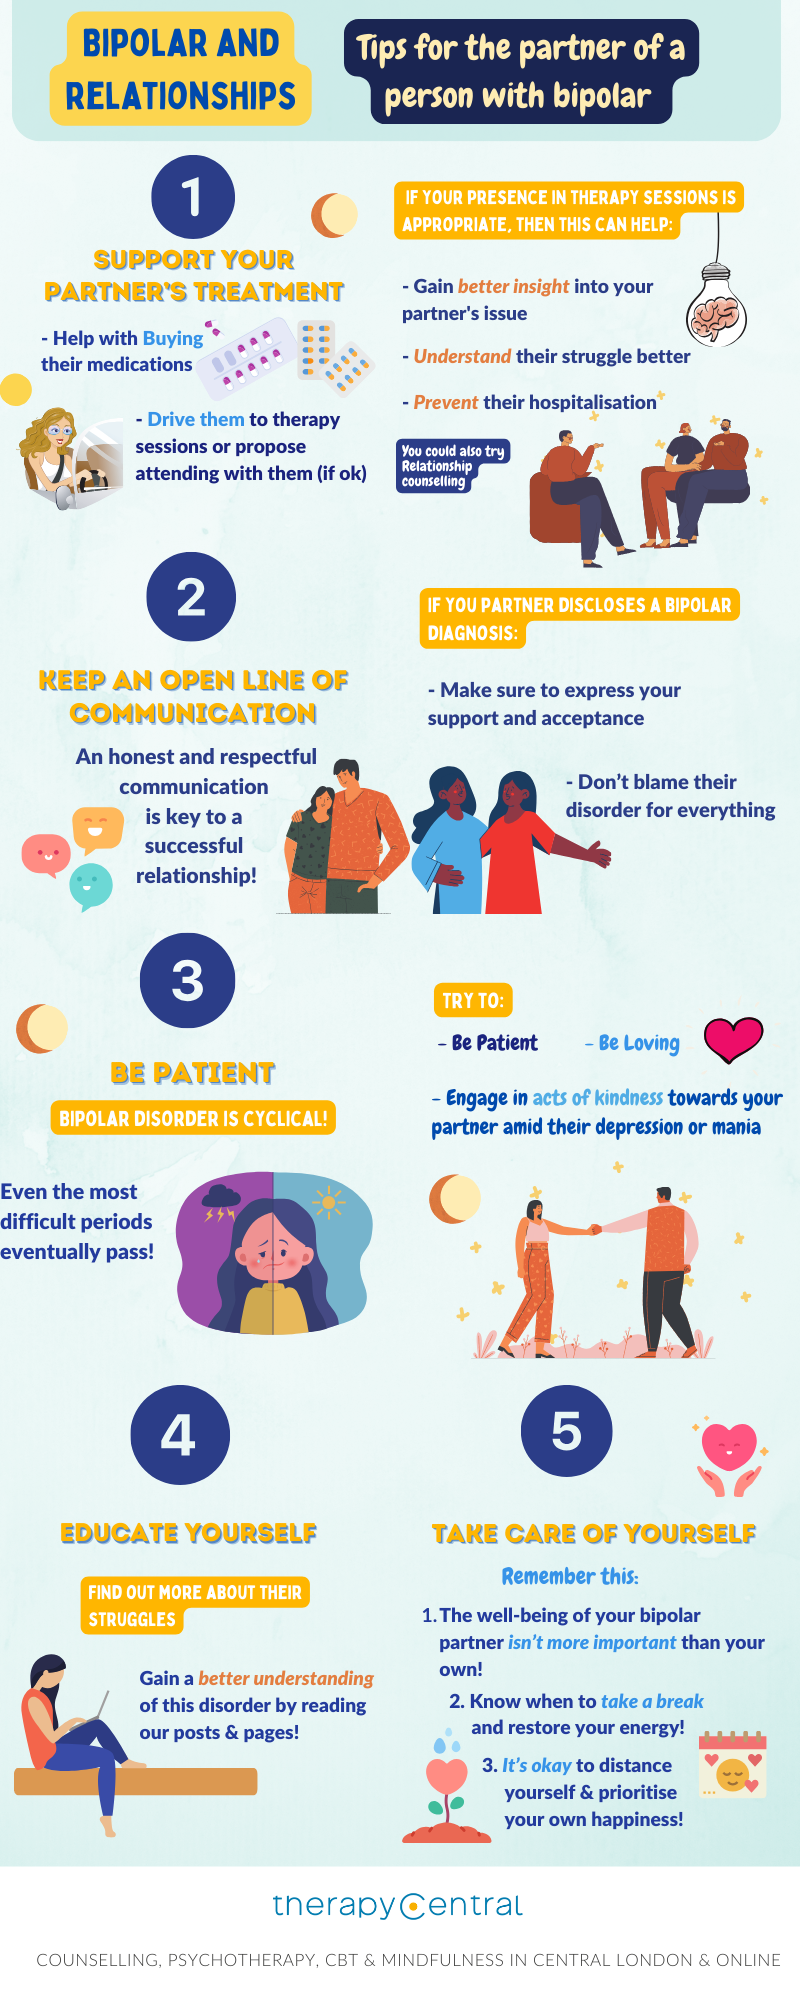 Tips for the partner of a person with bipolar.